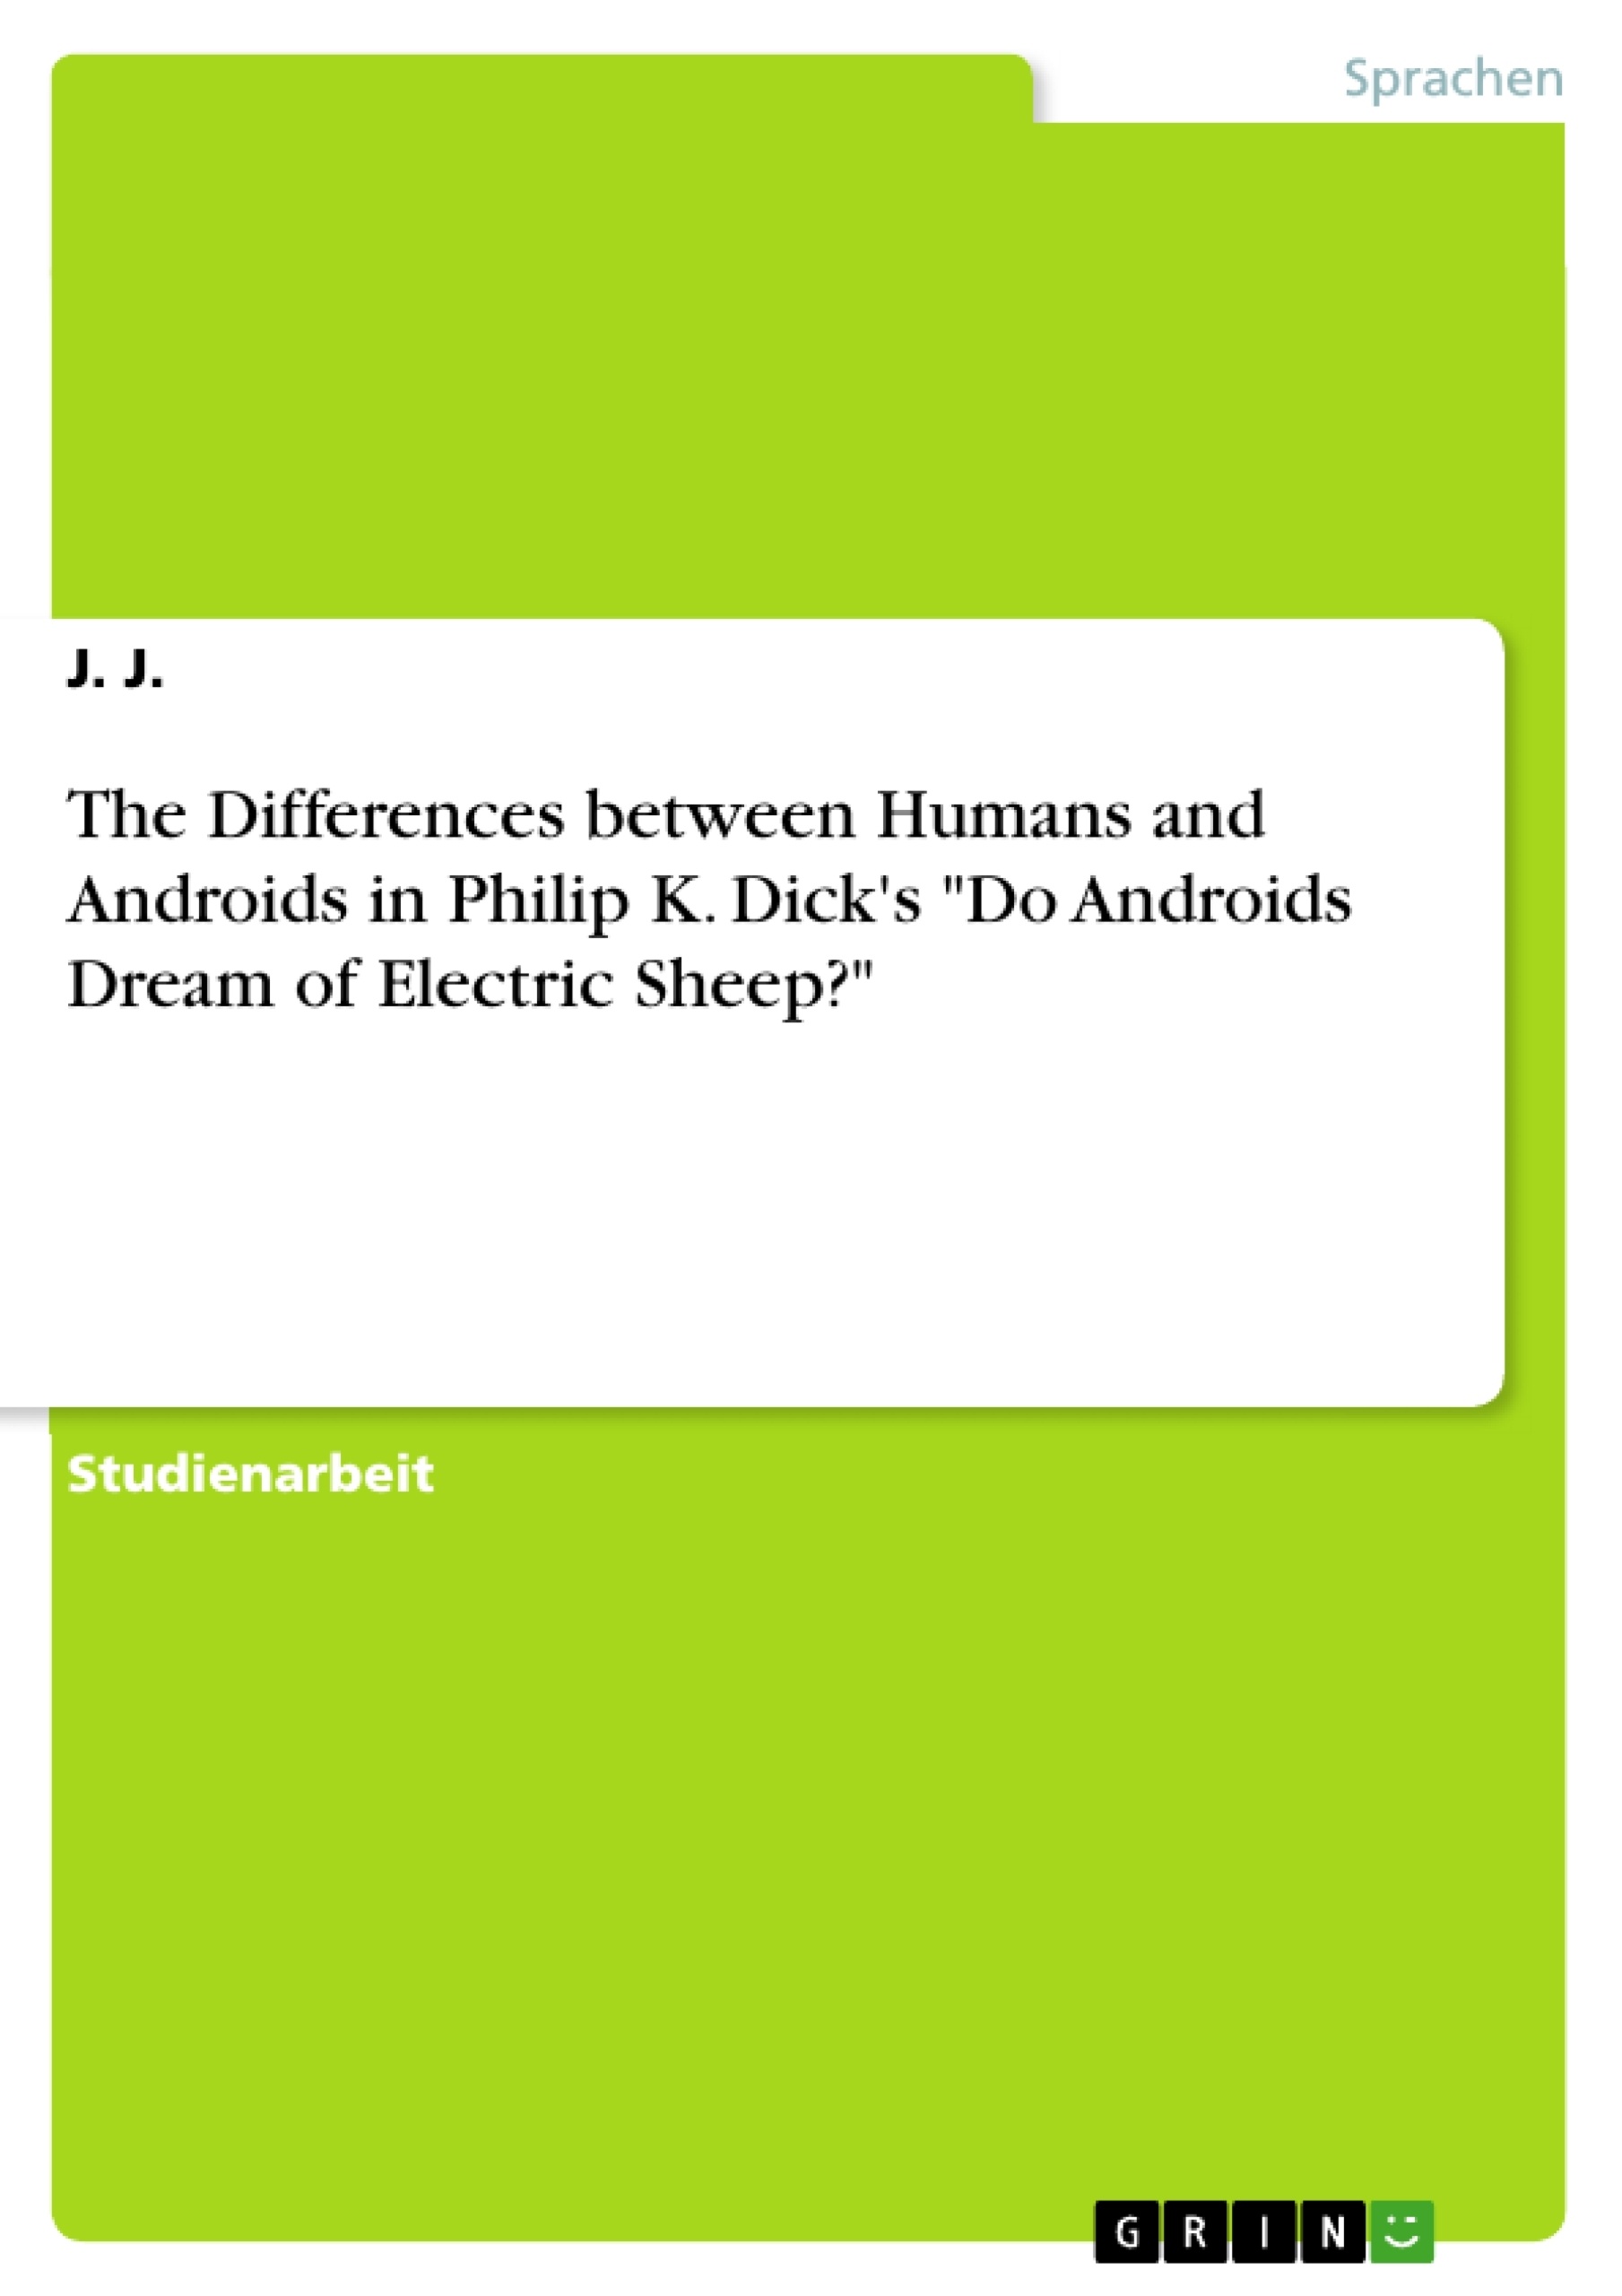 Titel: The Differences between Humans and Androids in Philip K. Dick's "Do Androids Dream of Electric Sheep?"